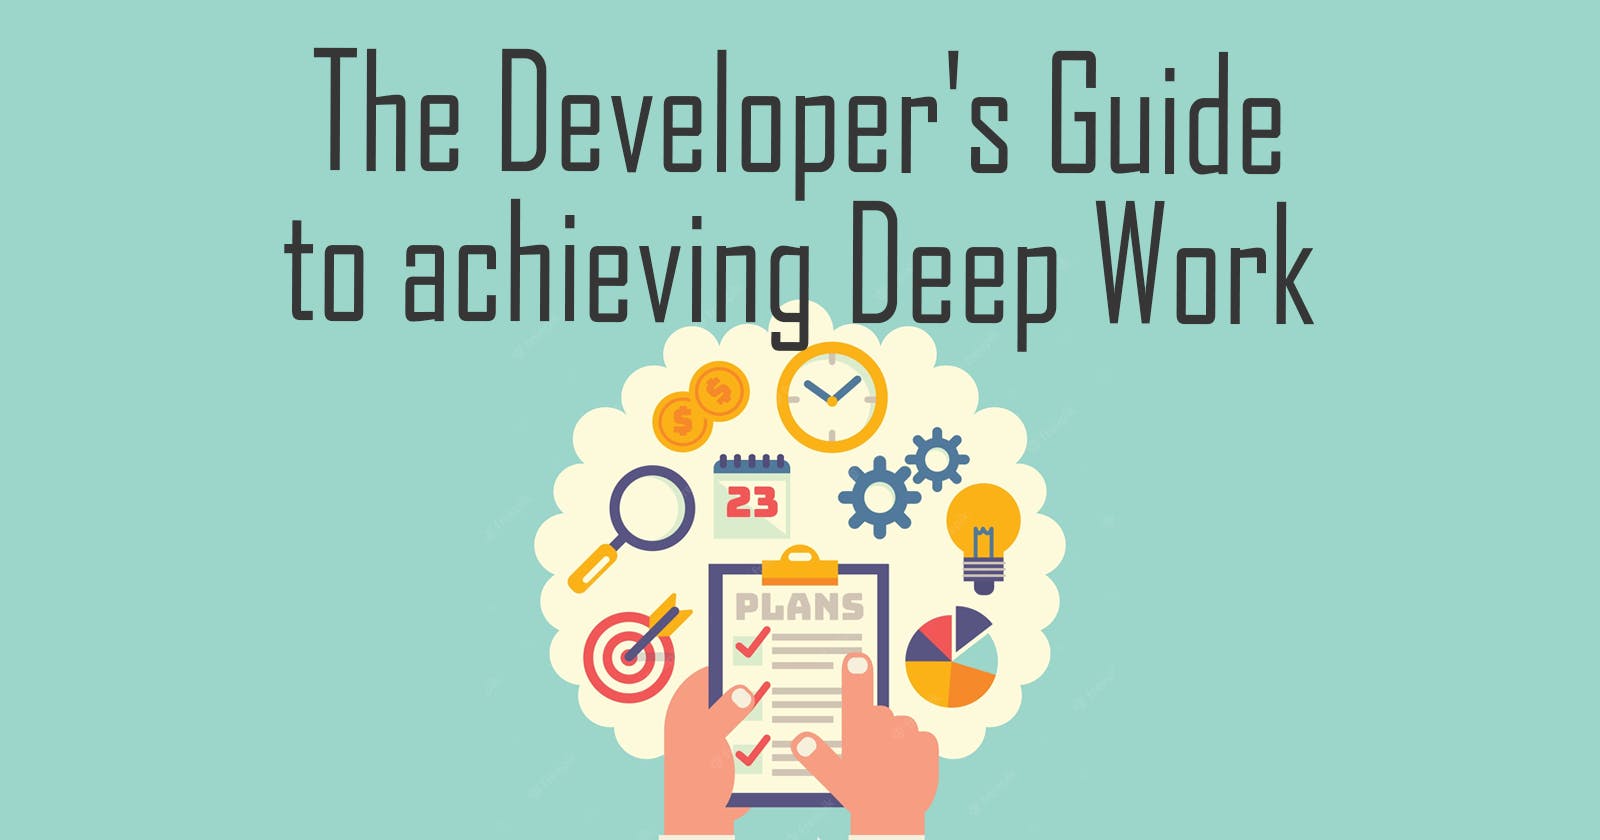 The Developer's Guide to achieving Deep Work for Focus & Productivity